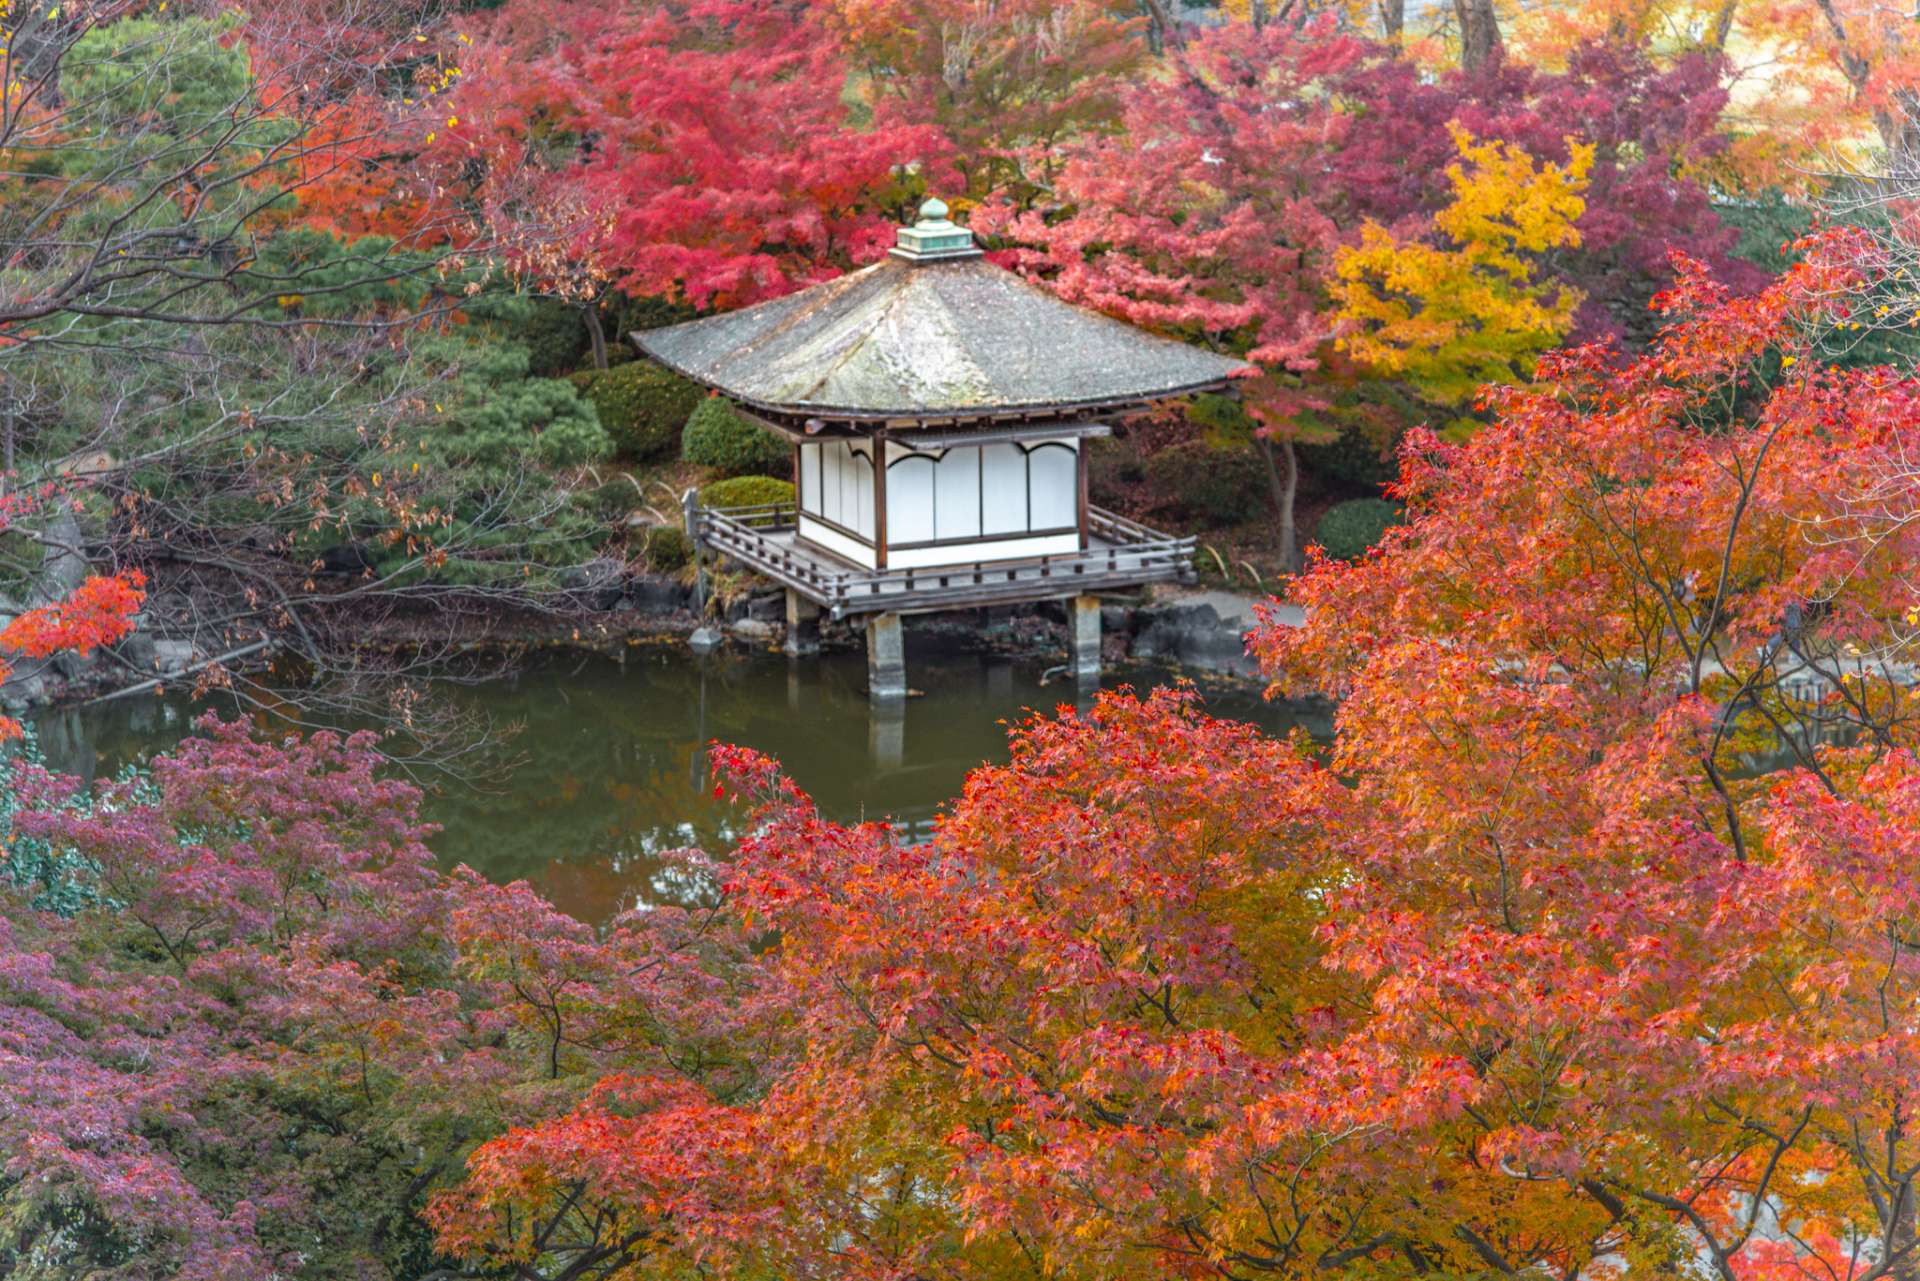 Also known as the Momijidani (“Maple Valley”) Gardens, this Japanese garden is especially beloved for its autumn views.